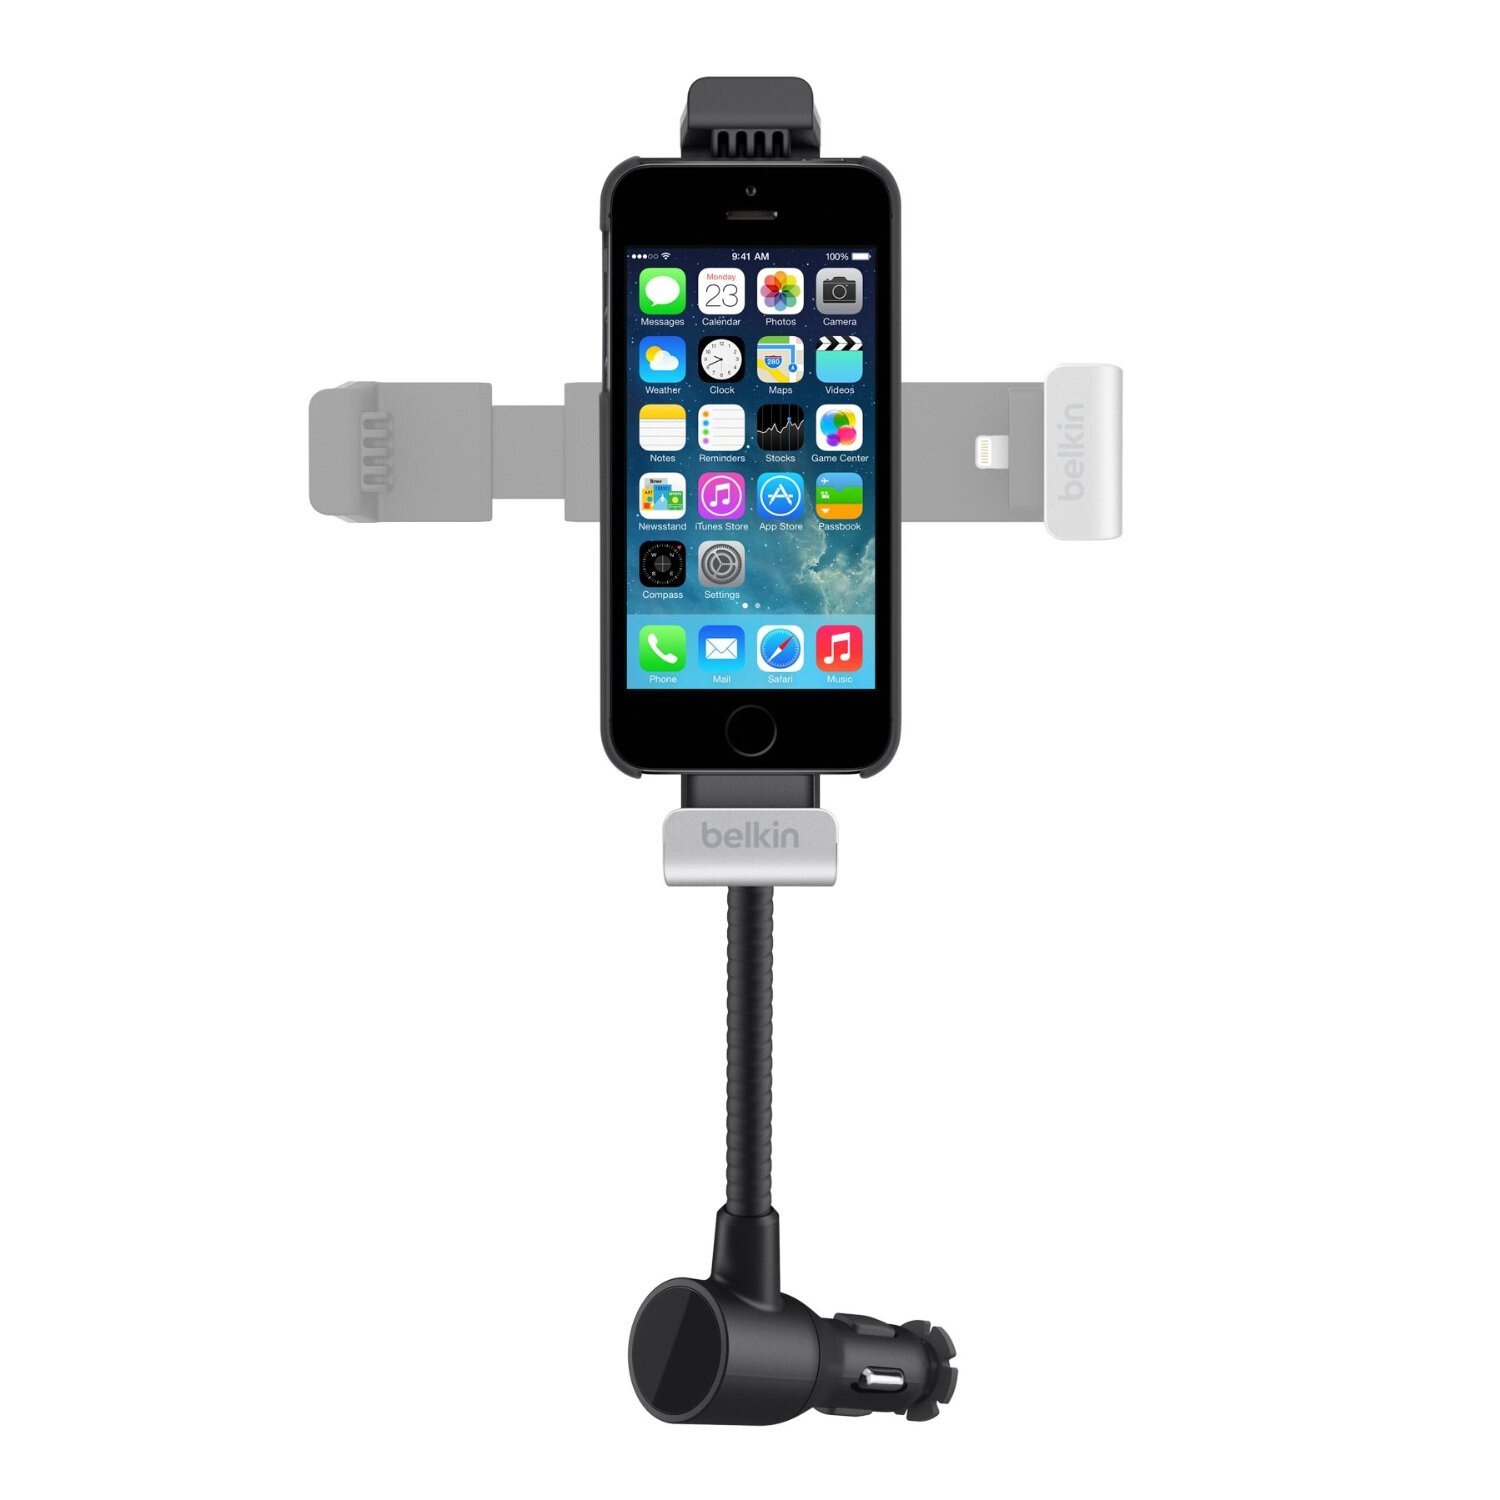 Buy Belkin Car Navigation + Charge Mount for iPhone 5/5s online in